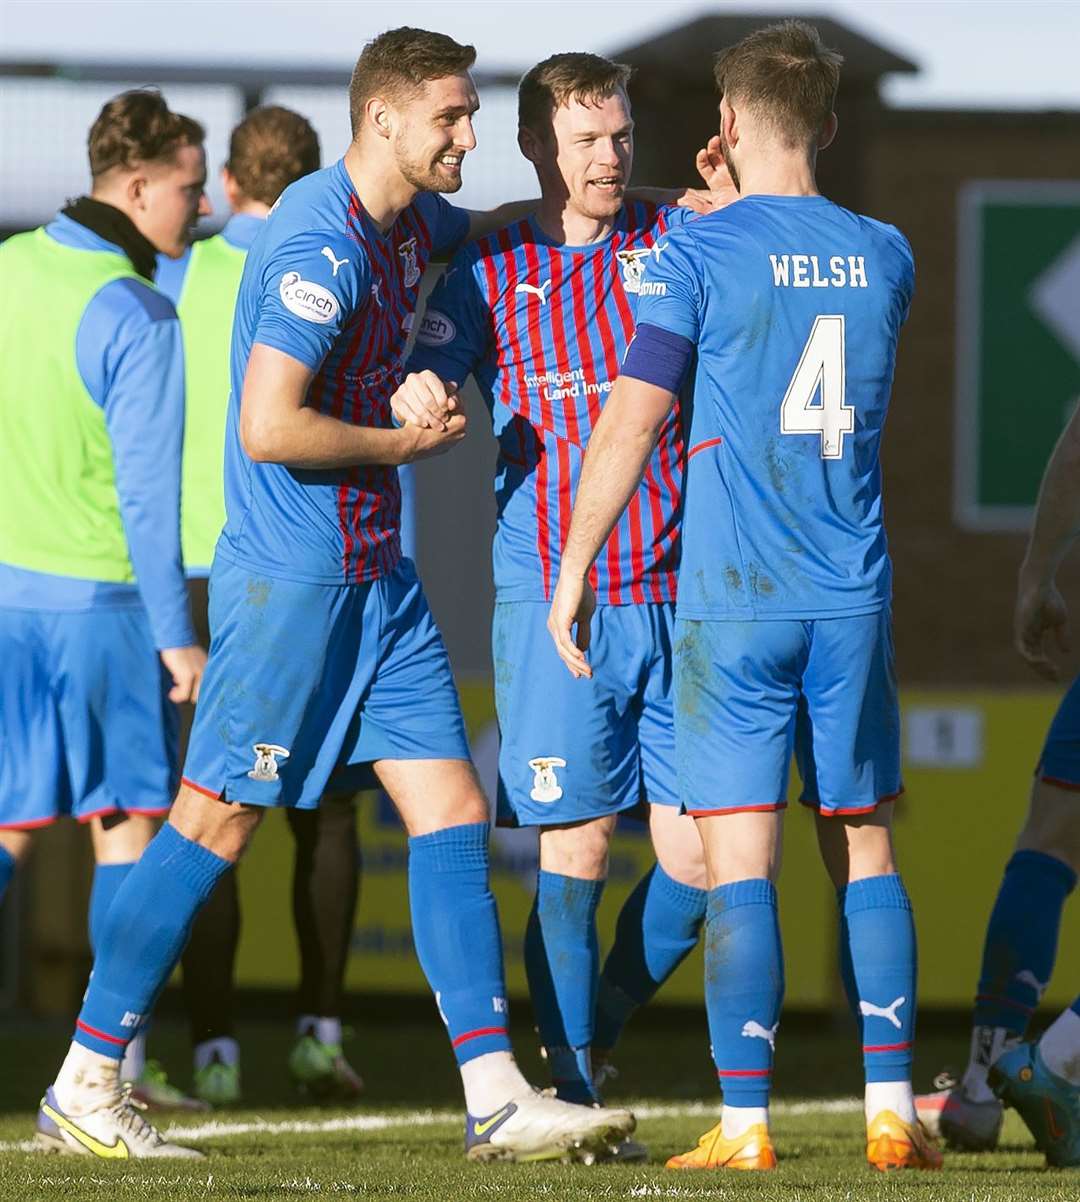 Picture - Ken Macpherson. Inverness CT(3) v Arbroath(0). 12.03.22. ICT’s Billy McKay celebrates his goal.